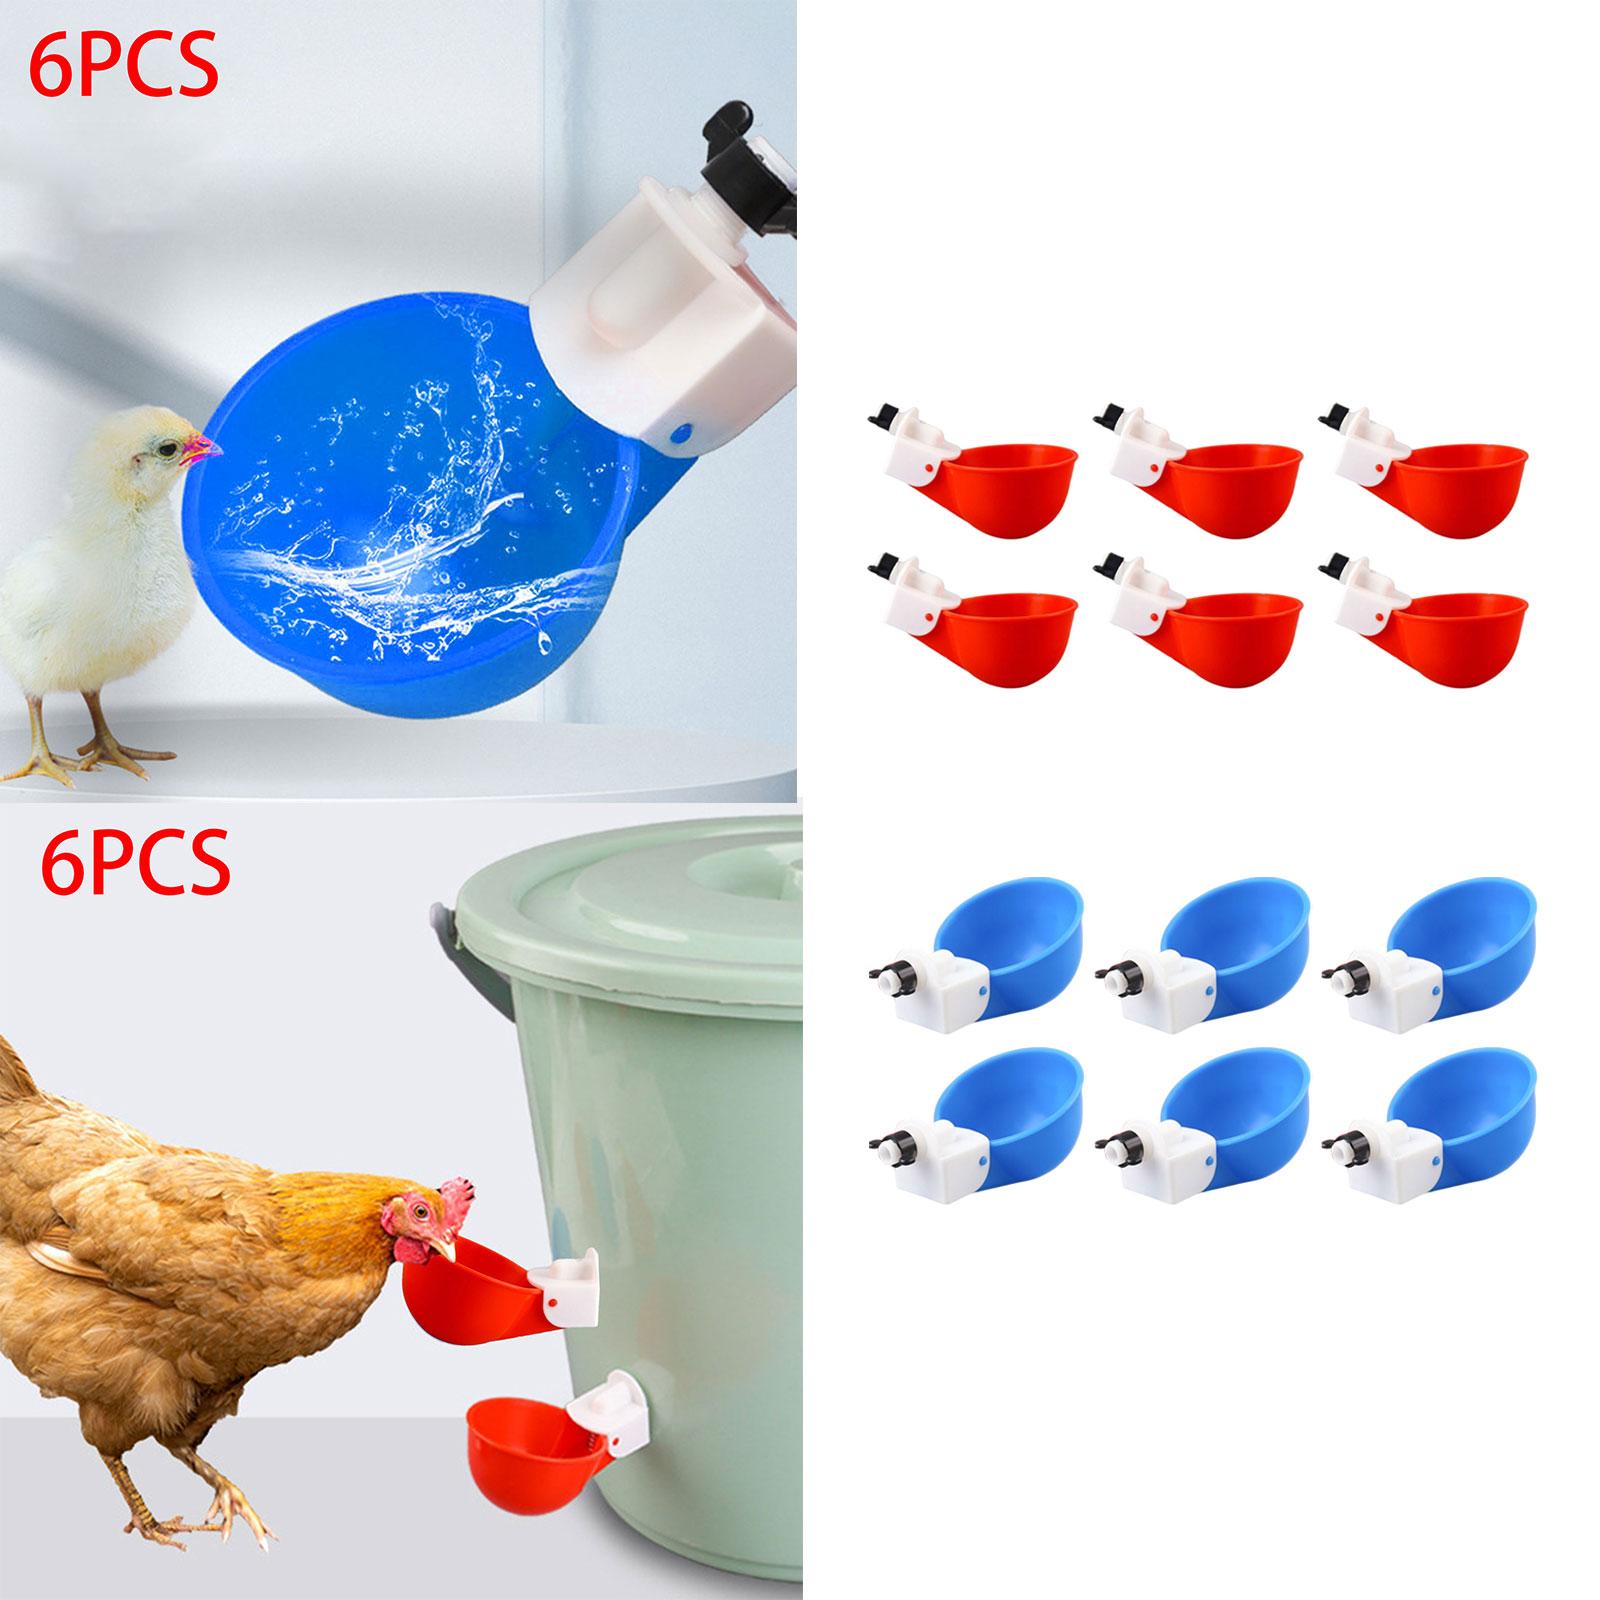 6Pcs Chicken Feeders Chicken Watering Cup Chicken Waterer for Birds Quail Red